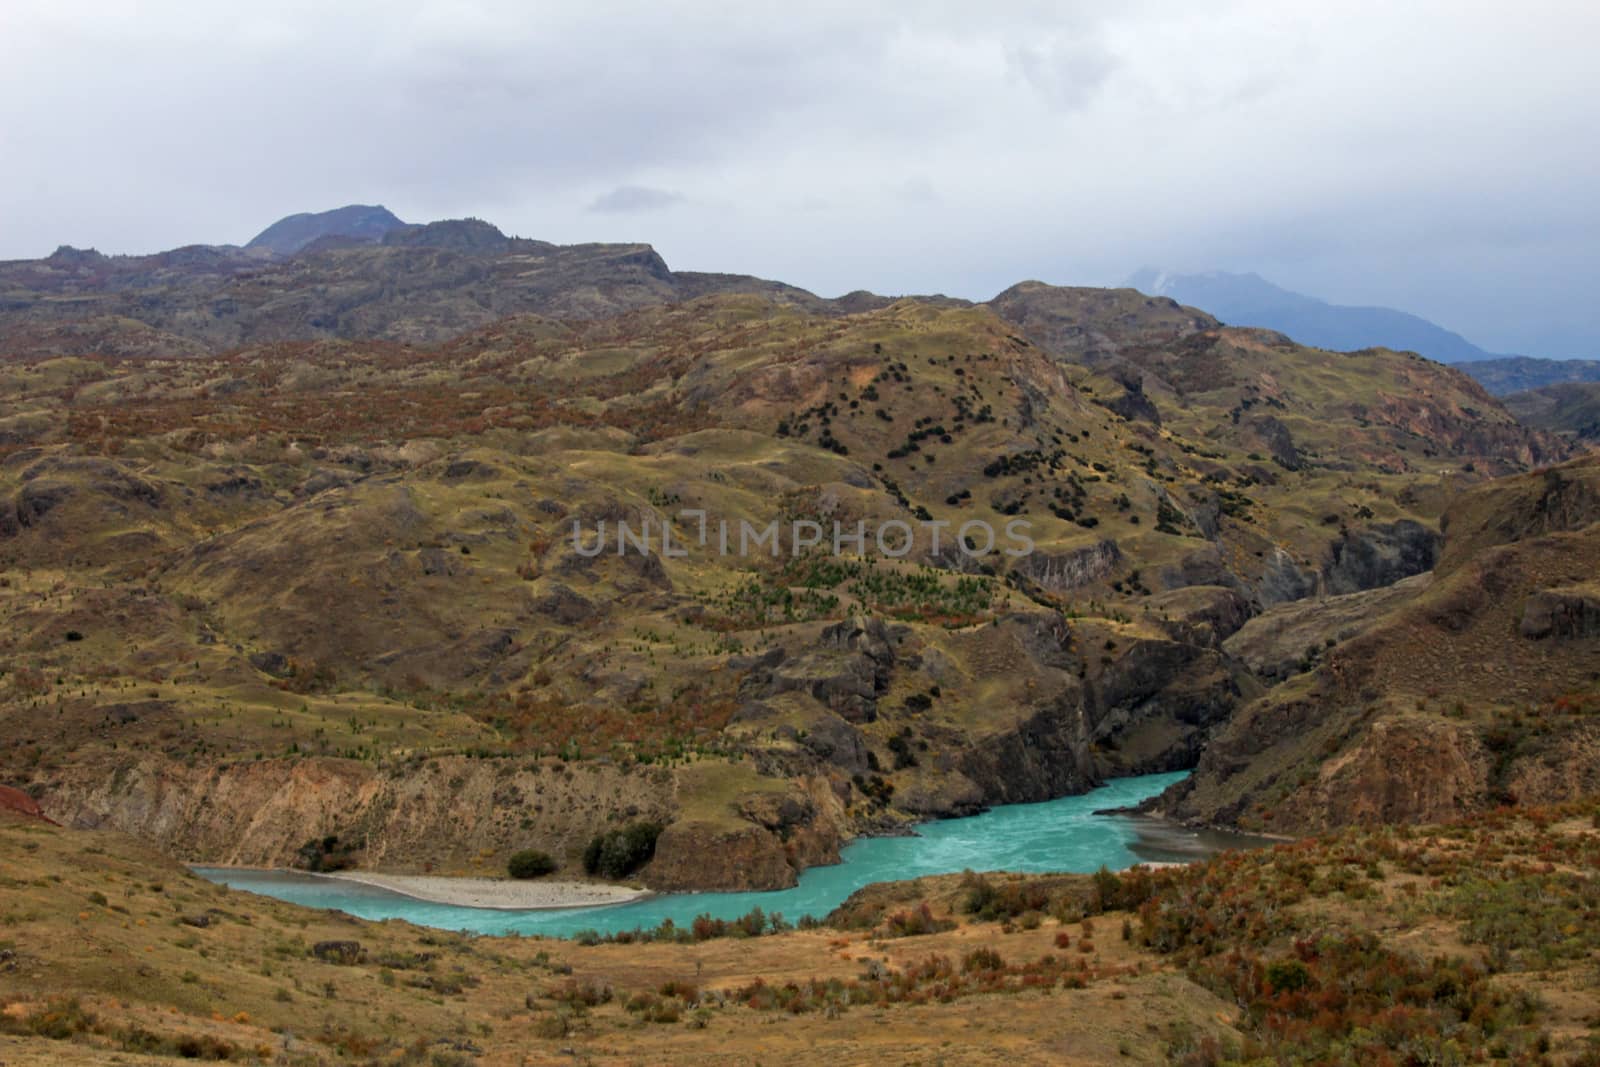 Beautiful blue Baker river, Carretera Austral, Patagonia, Chile by cicloco